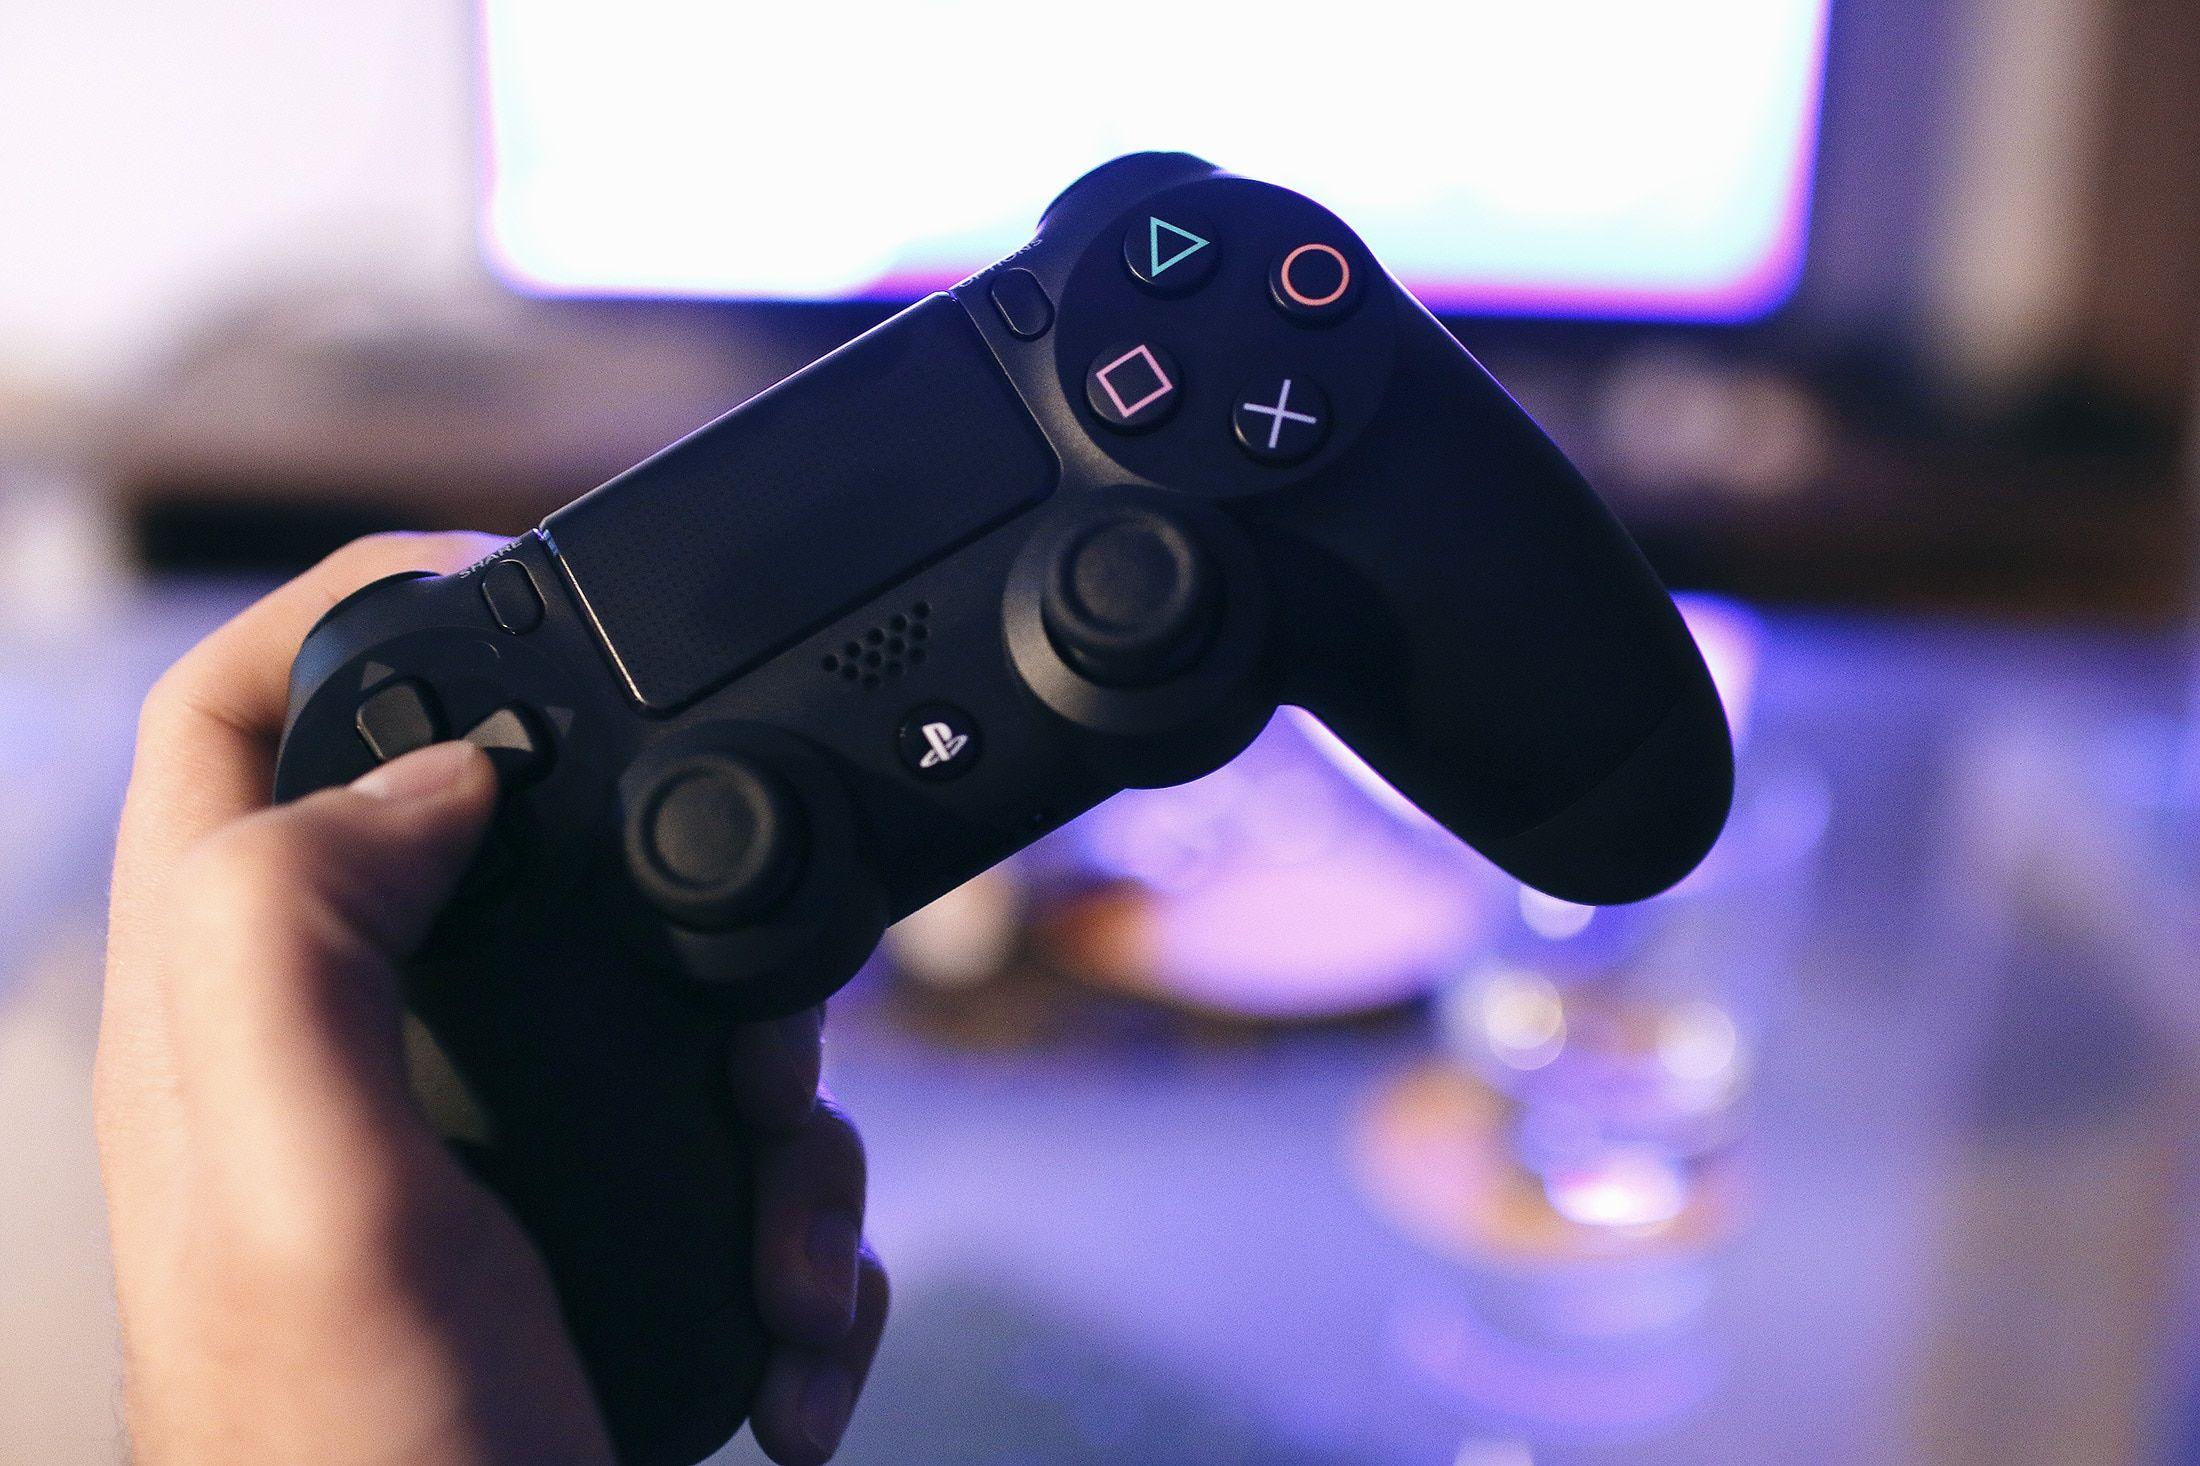 wallpaper. person holding sony ps4 game controller